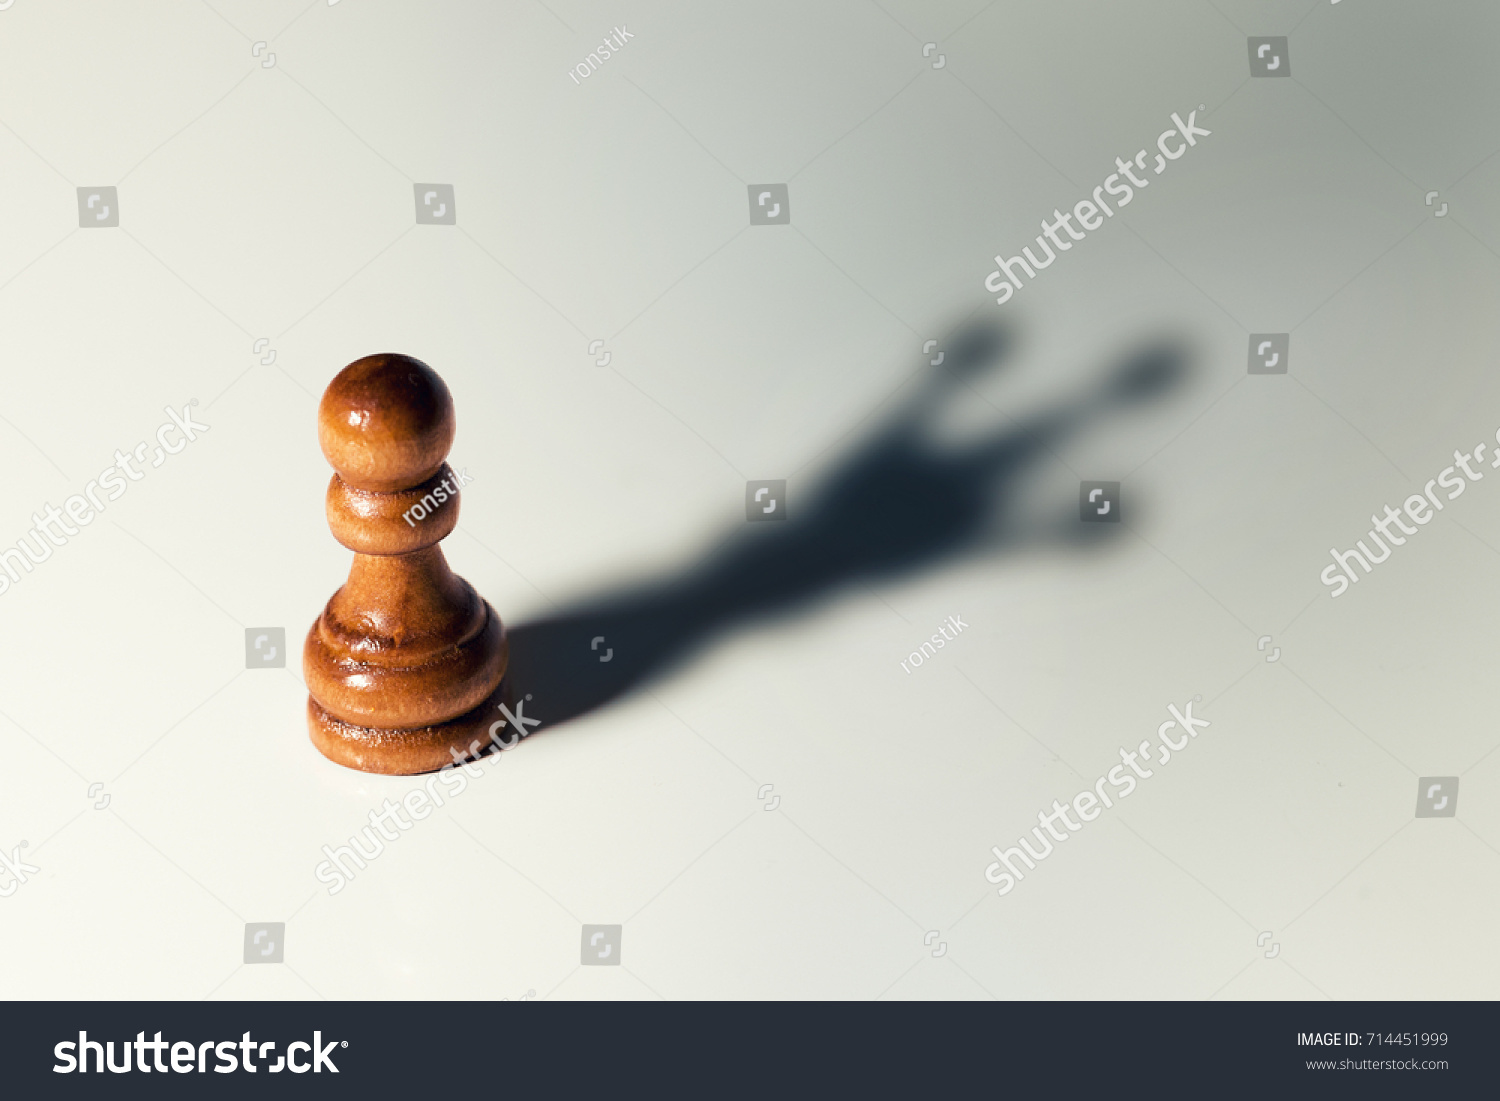 trust yourself, self confident concept - chess pawn with king shadow #714451999